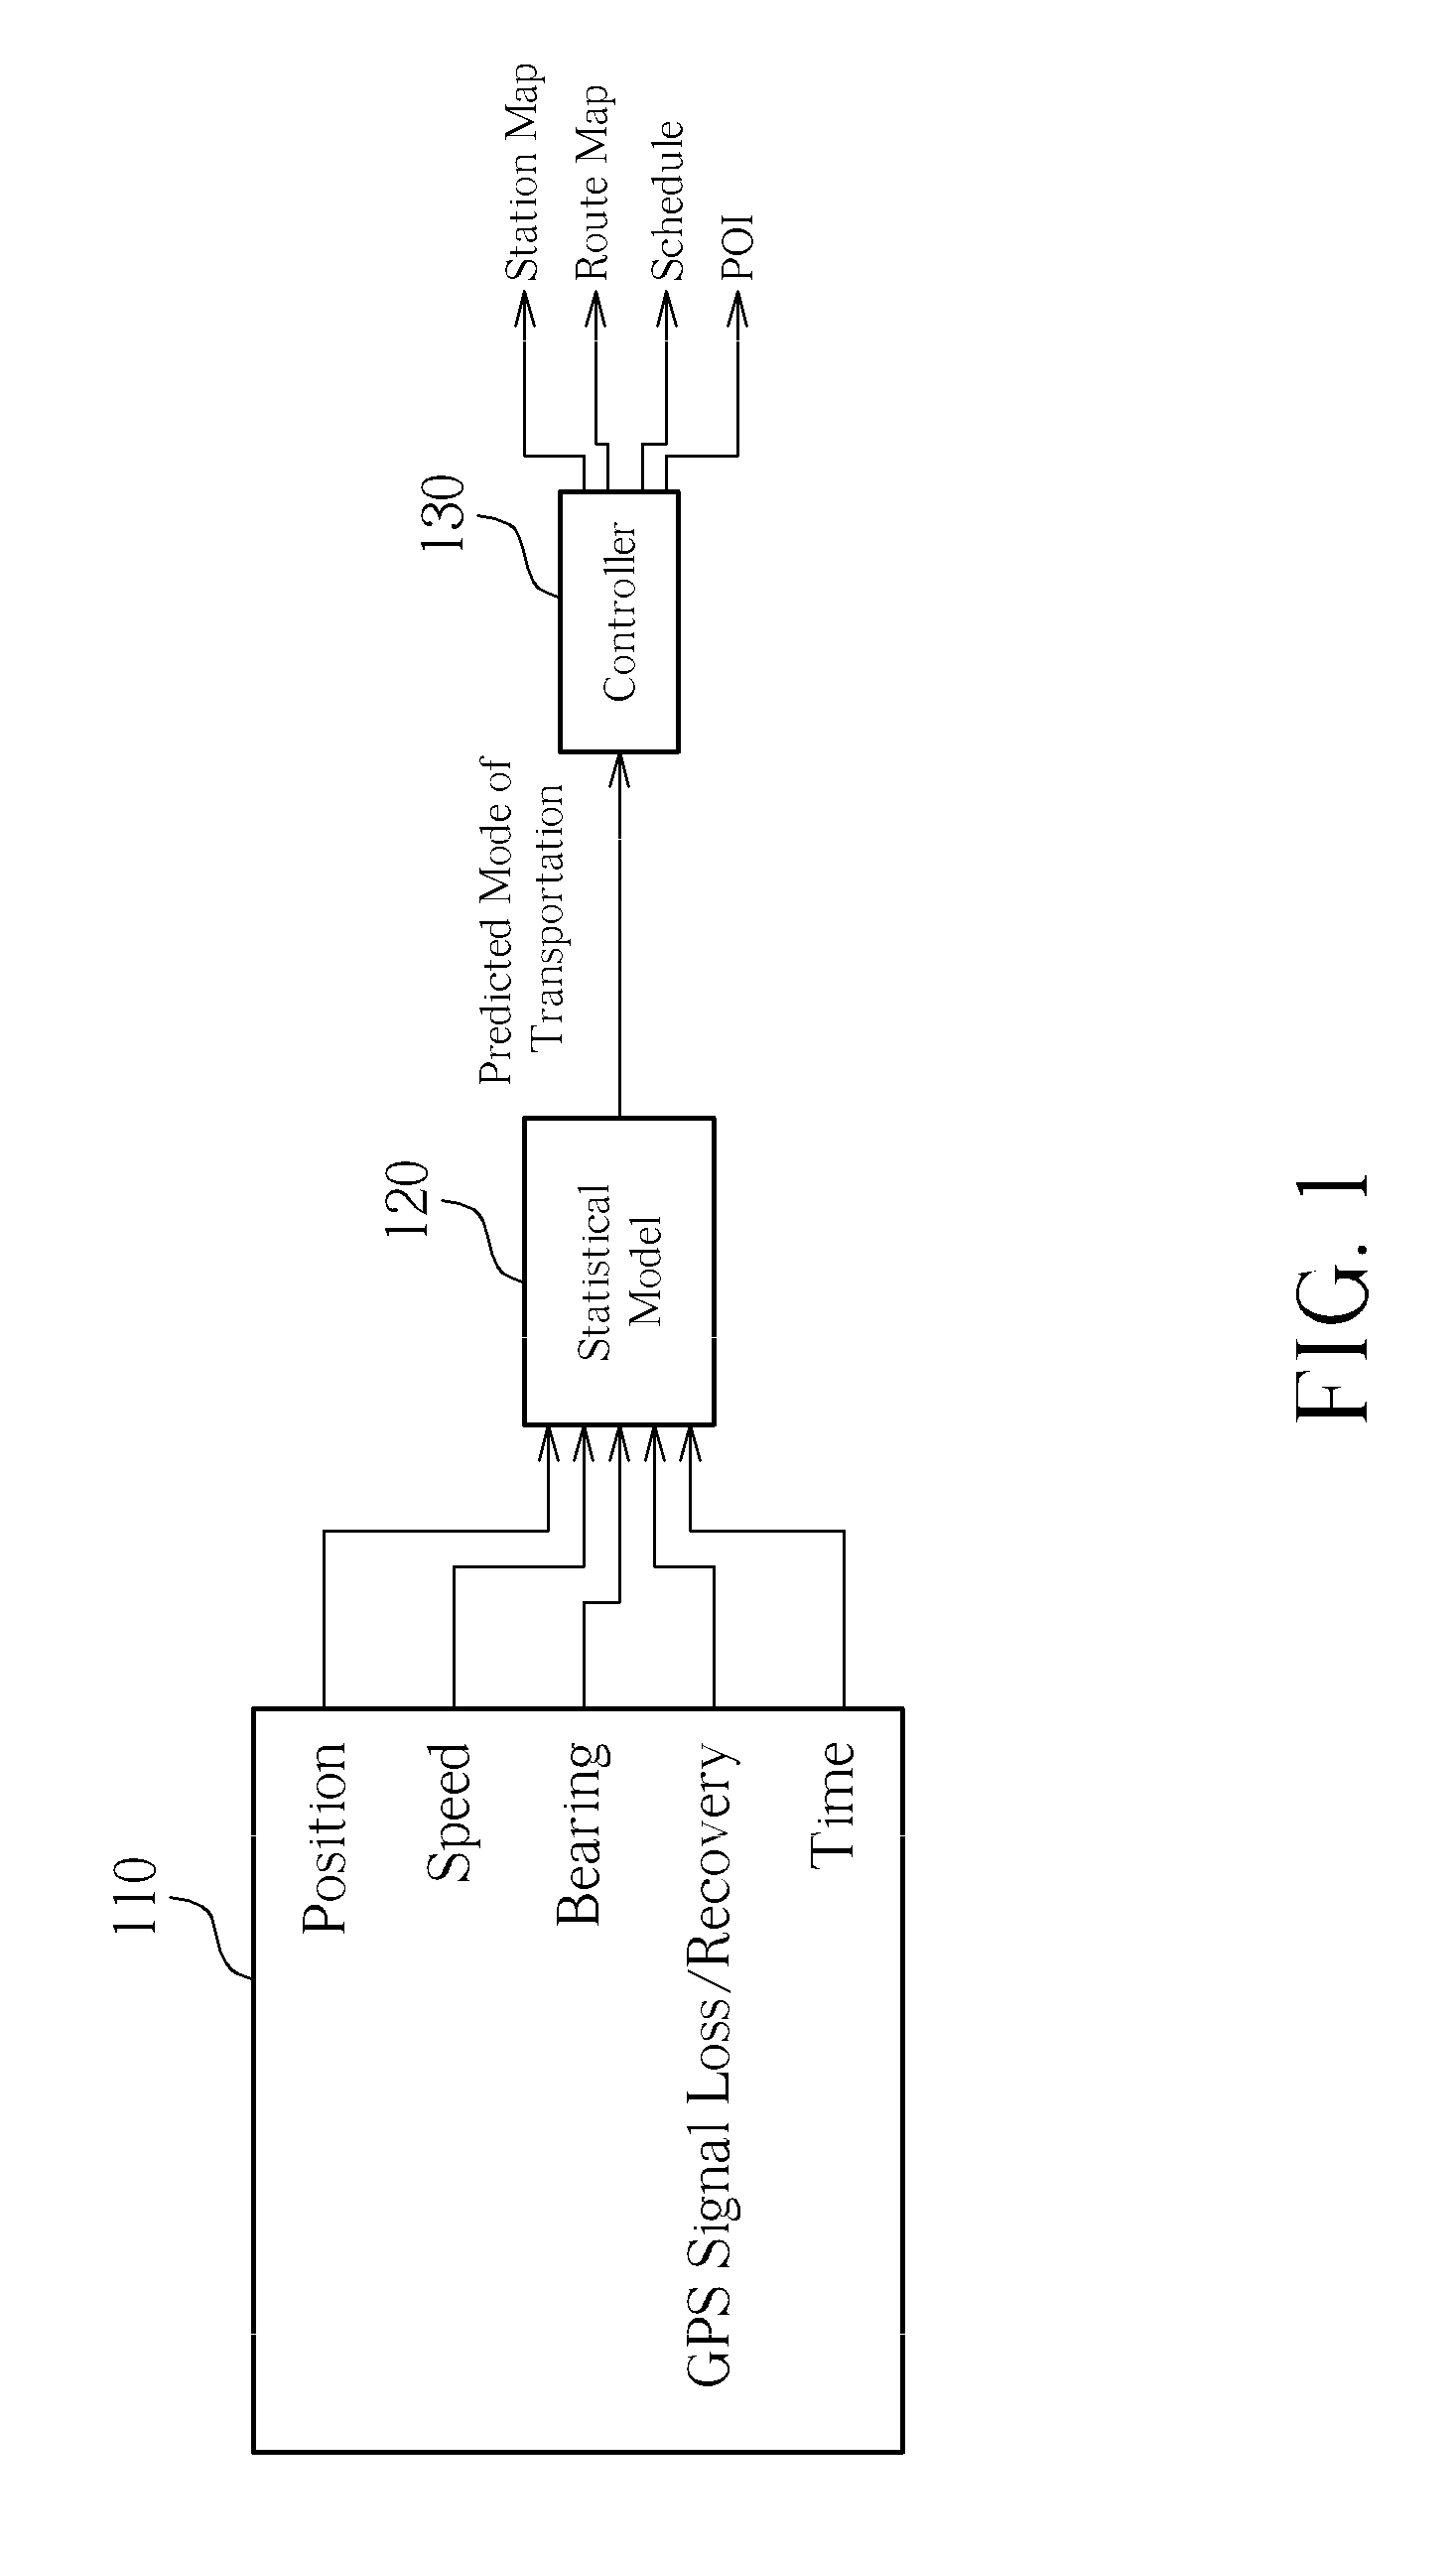 Method of Determining Mode of Transportation in a Personal Navigation Device